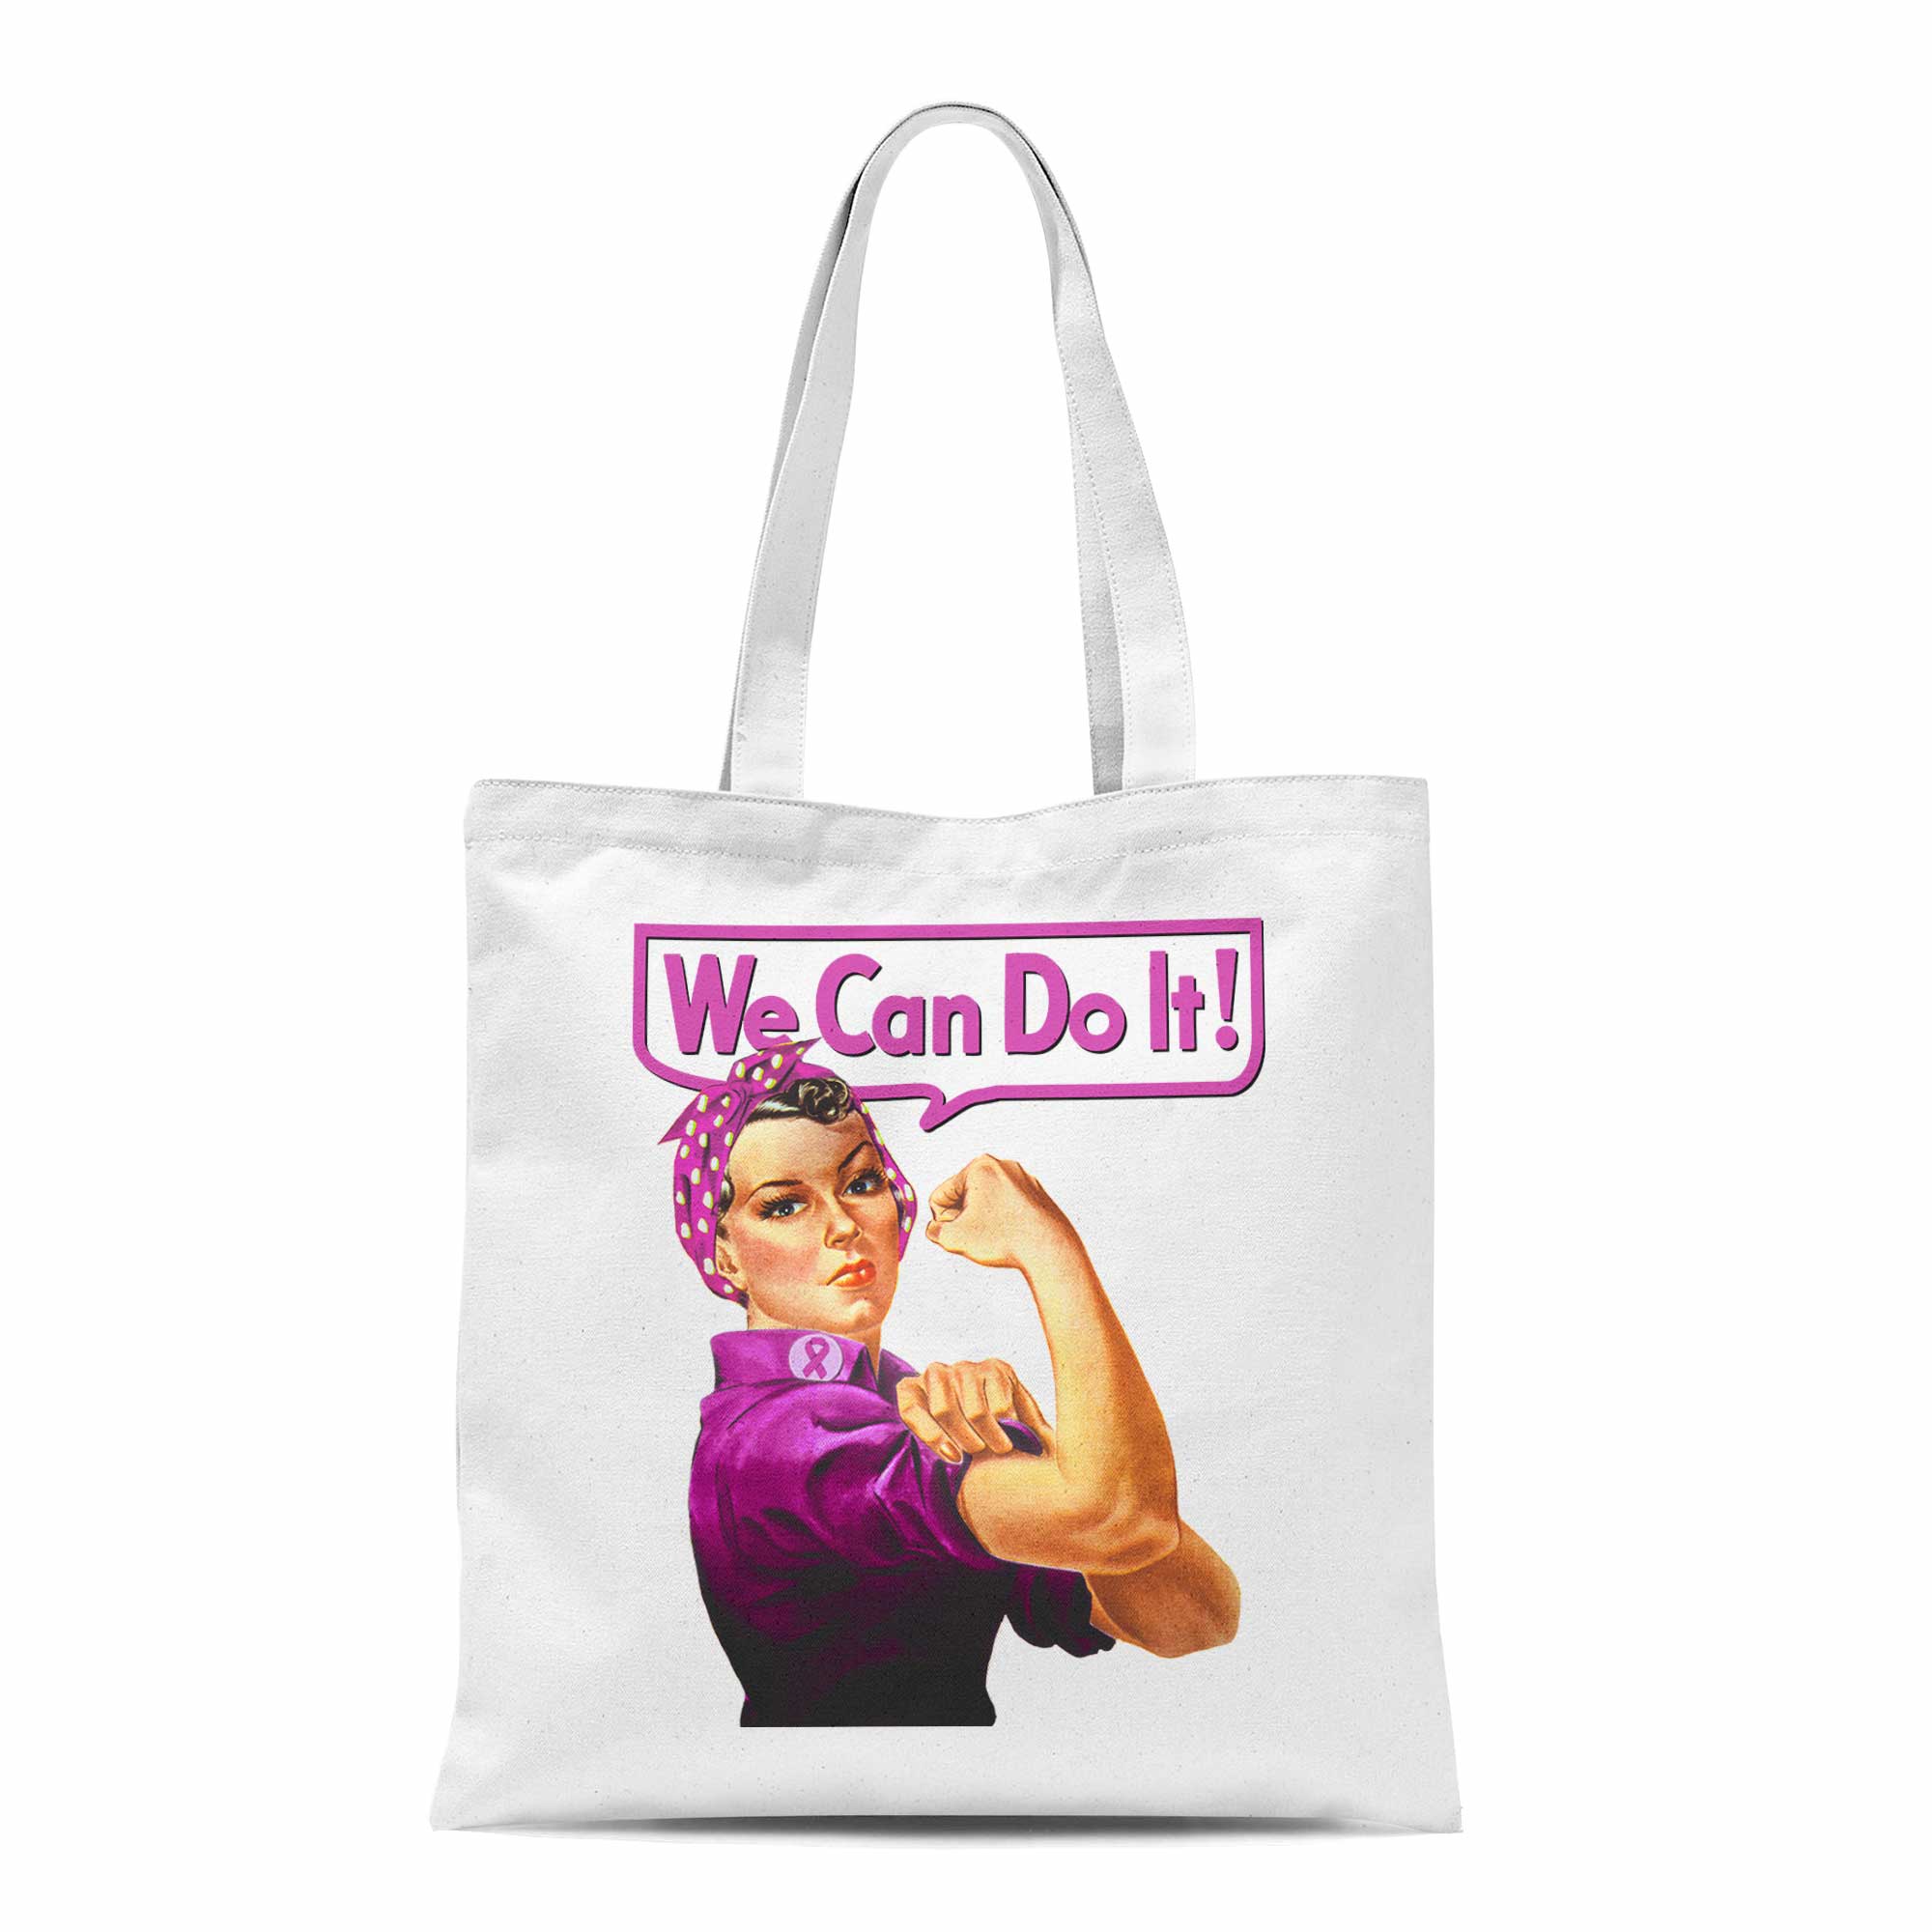 We Can Do It Tote Bag